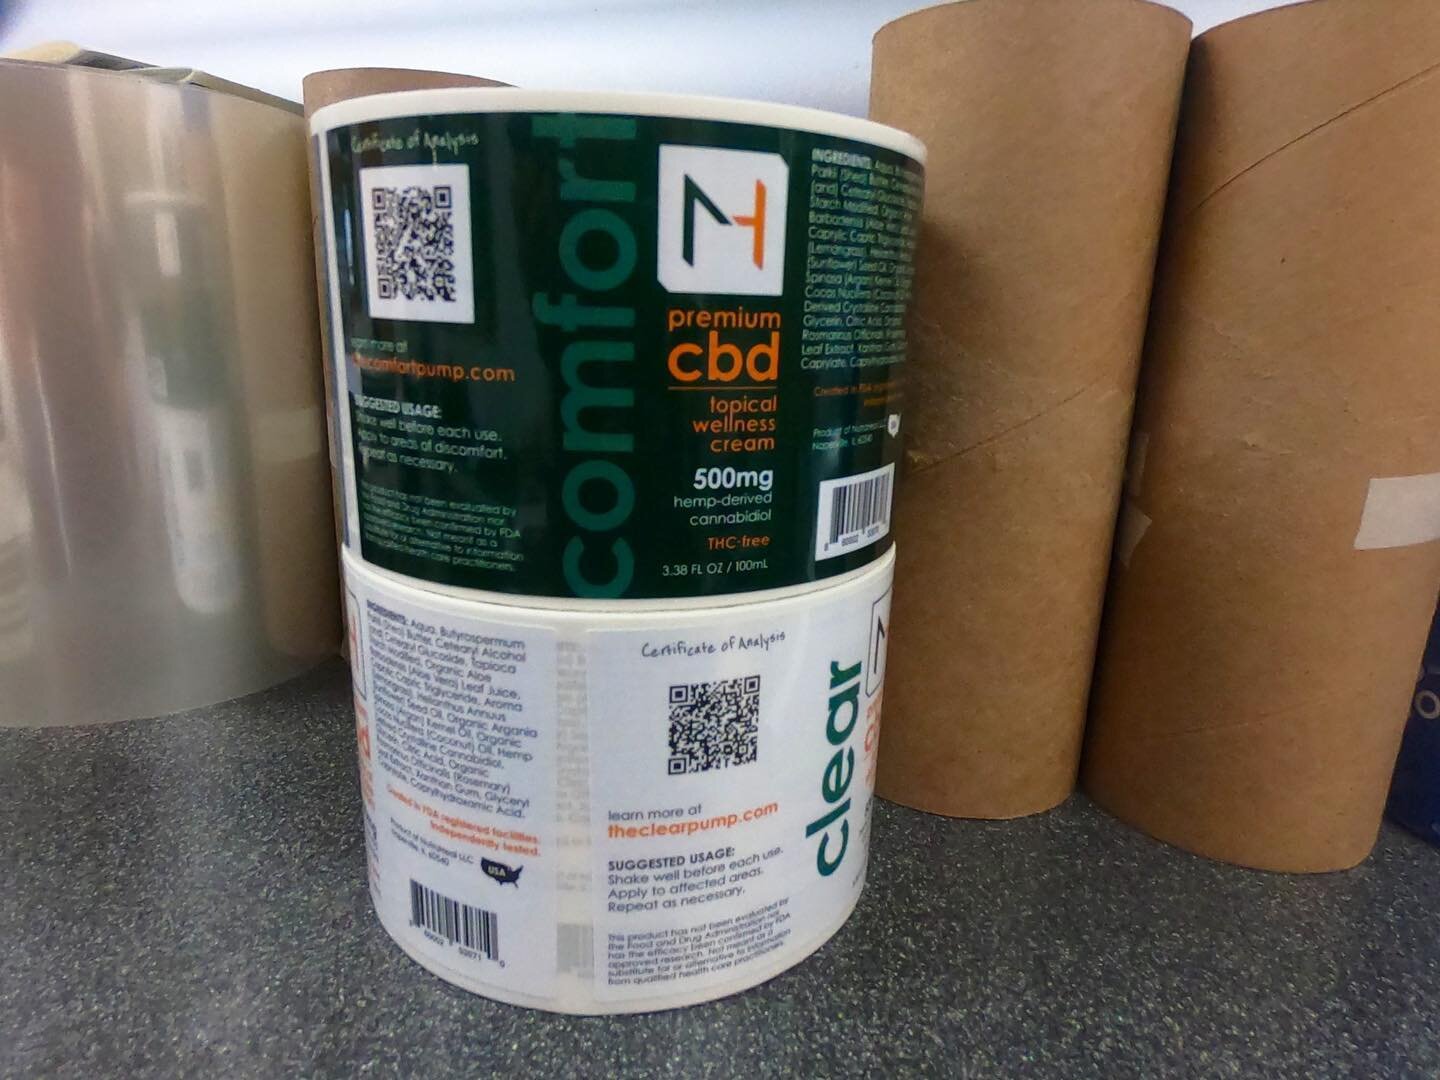 QR Codes are a smart addition to your product labels. When you don&rsquo;t have enough space to include everything you&rsquo;d like, you can send users to your website for more info - directions, product specs, videos, coupons or contests.
.
.
#cbdla